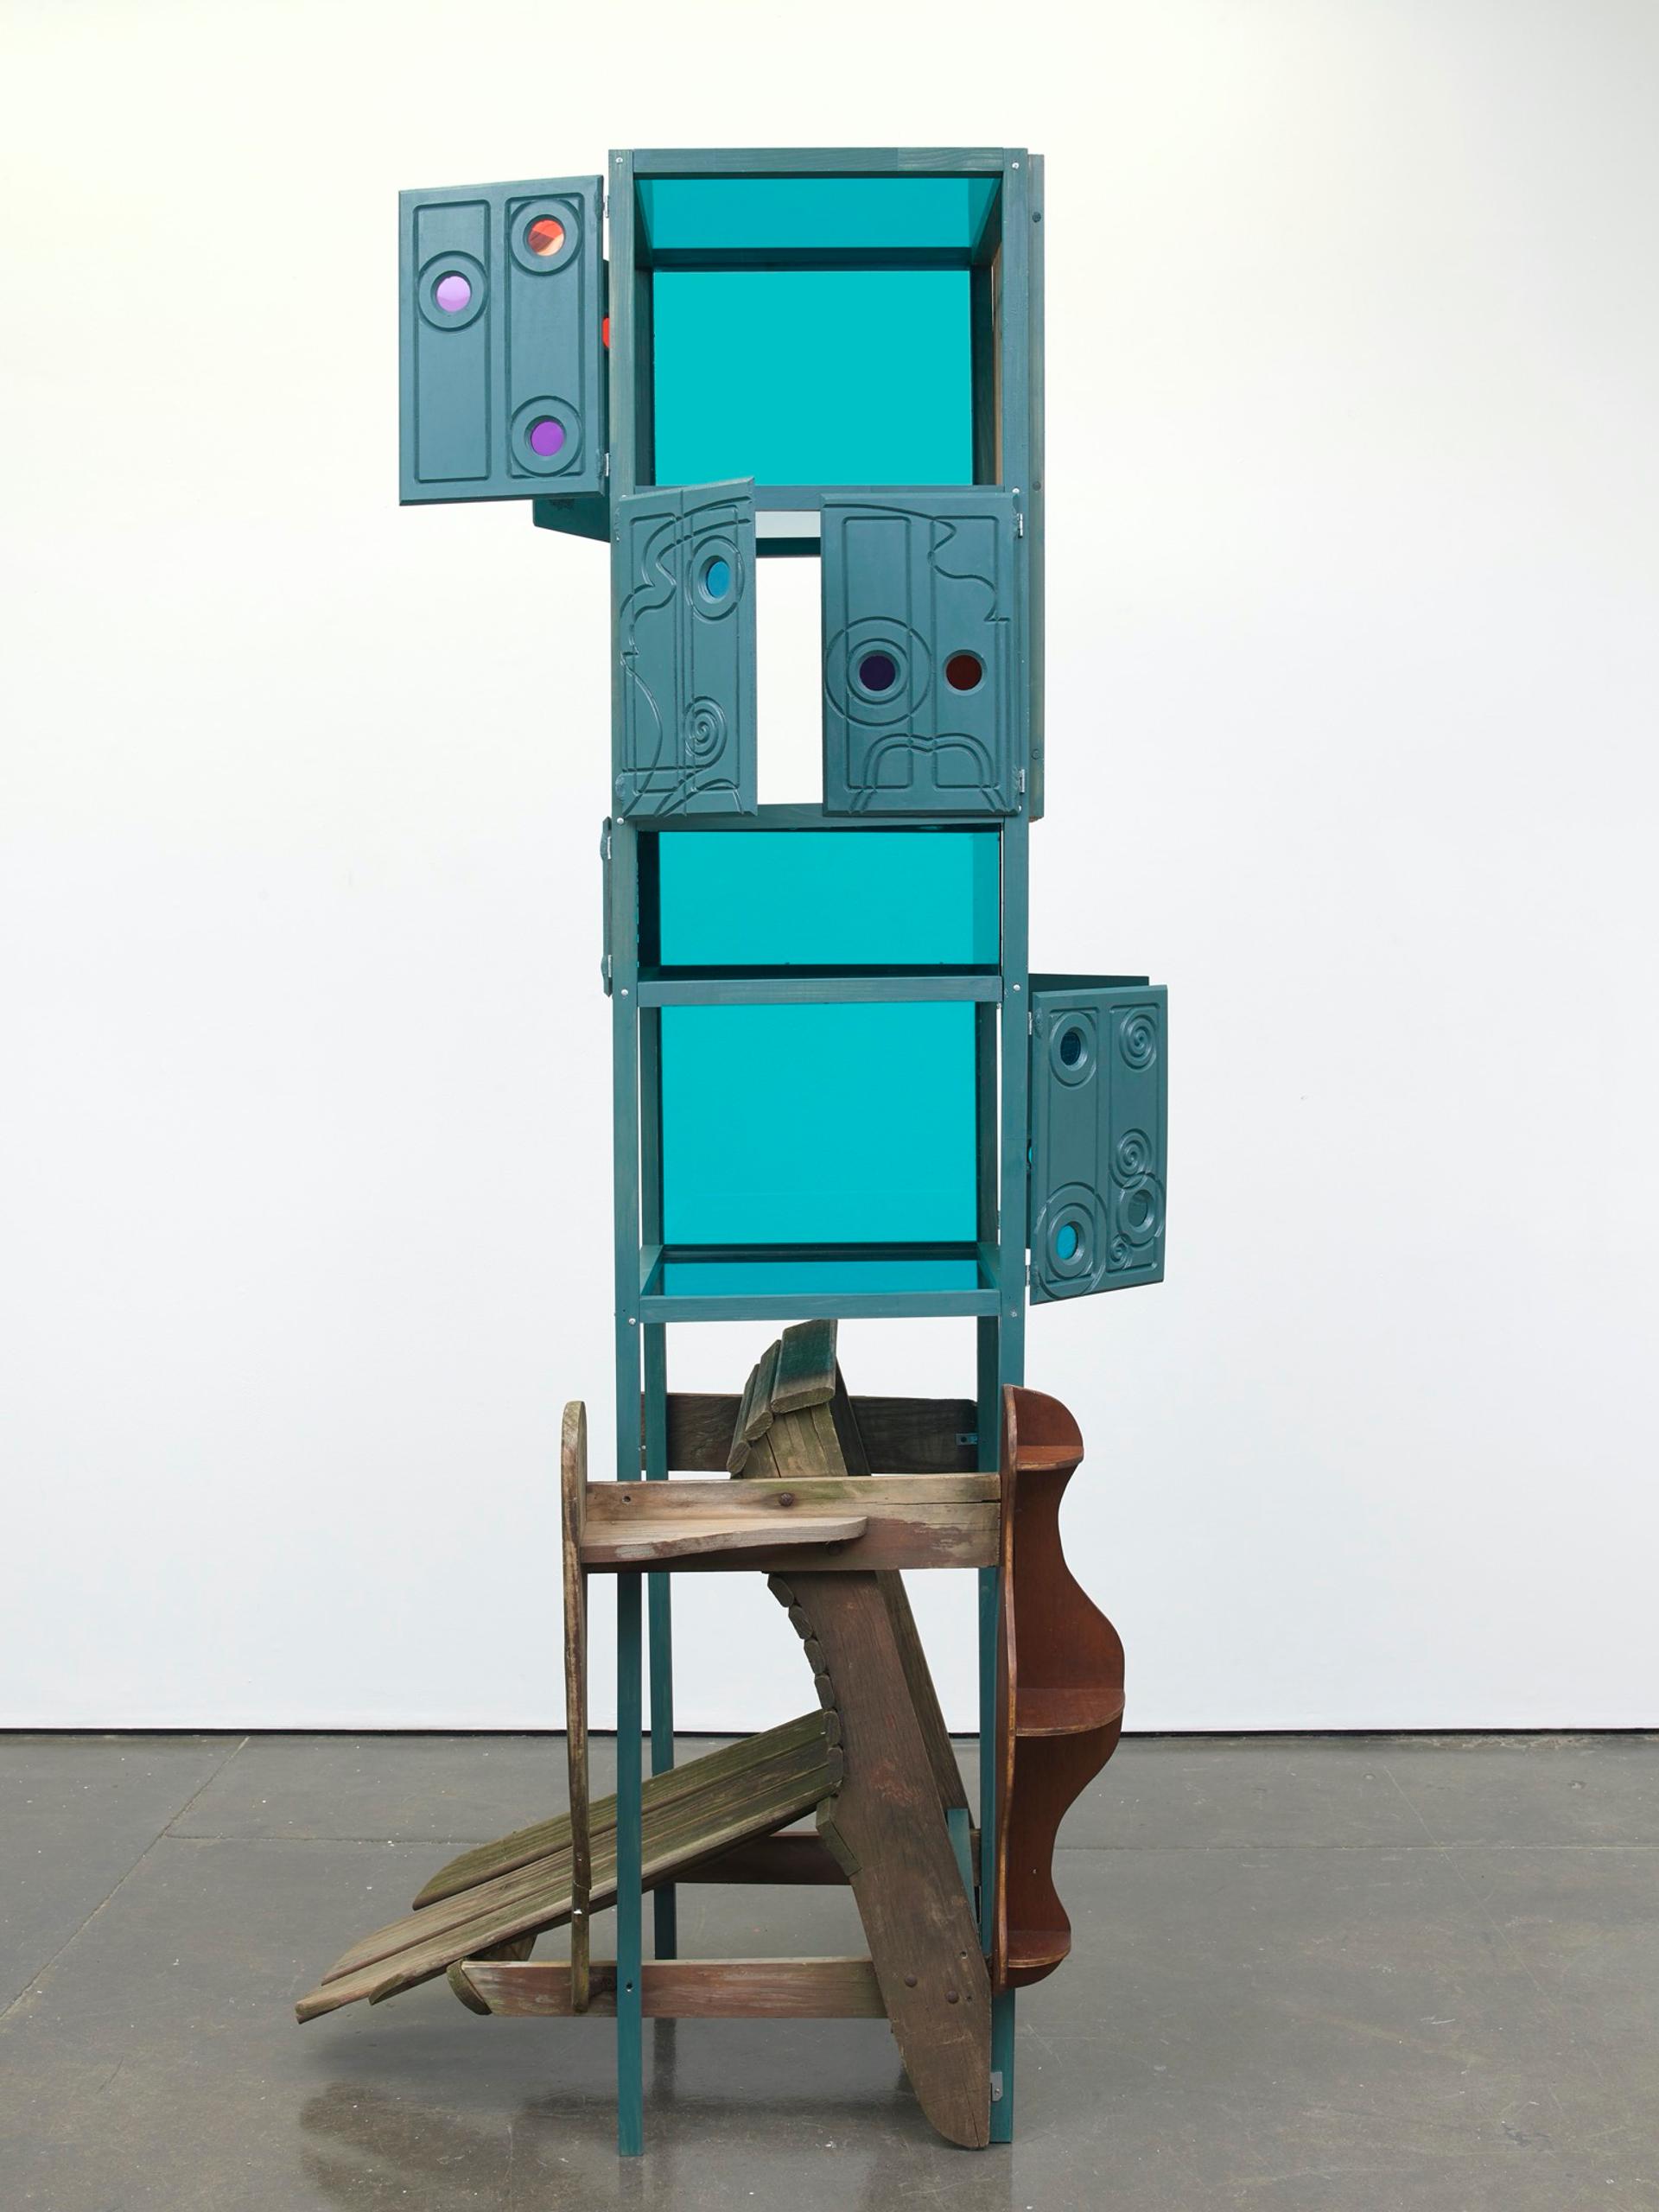 Jessi Reaves, NY state cabinet, 2019. Wood, plexiglass, paint, sawdust, wood glue, hardware. 97 × 42 × 32 in. (246.38 × 106.68 × 81.28 cm) Courtesy the artist, Herald St, London and Bridget Donahue NYC. Photo: Andy Keate.